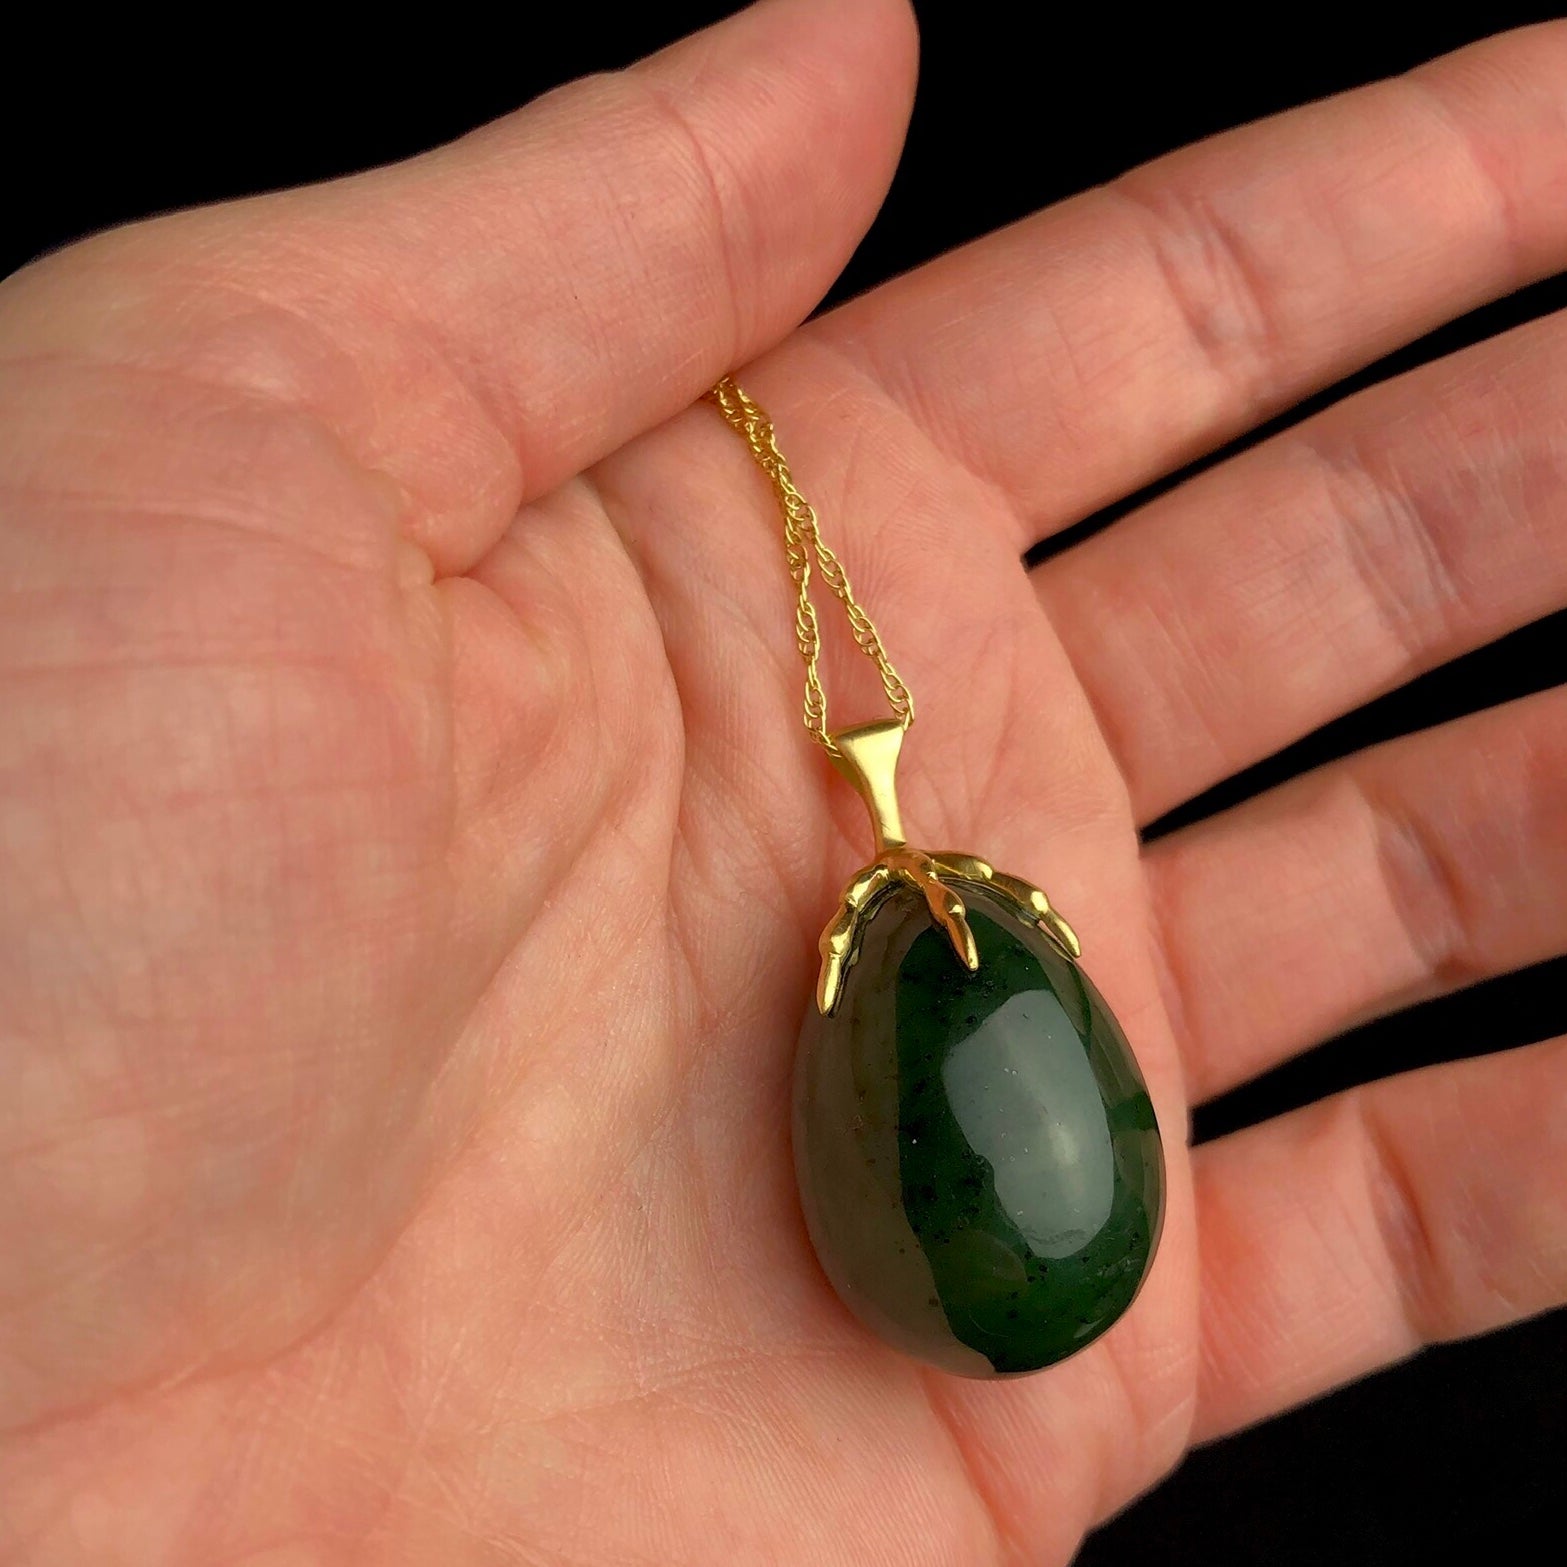 Green egg shaped stone held by a gold bird claw on gold chain shown in hand